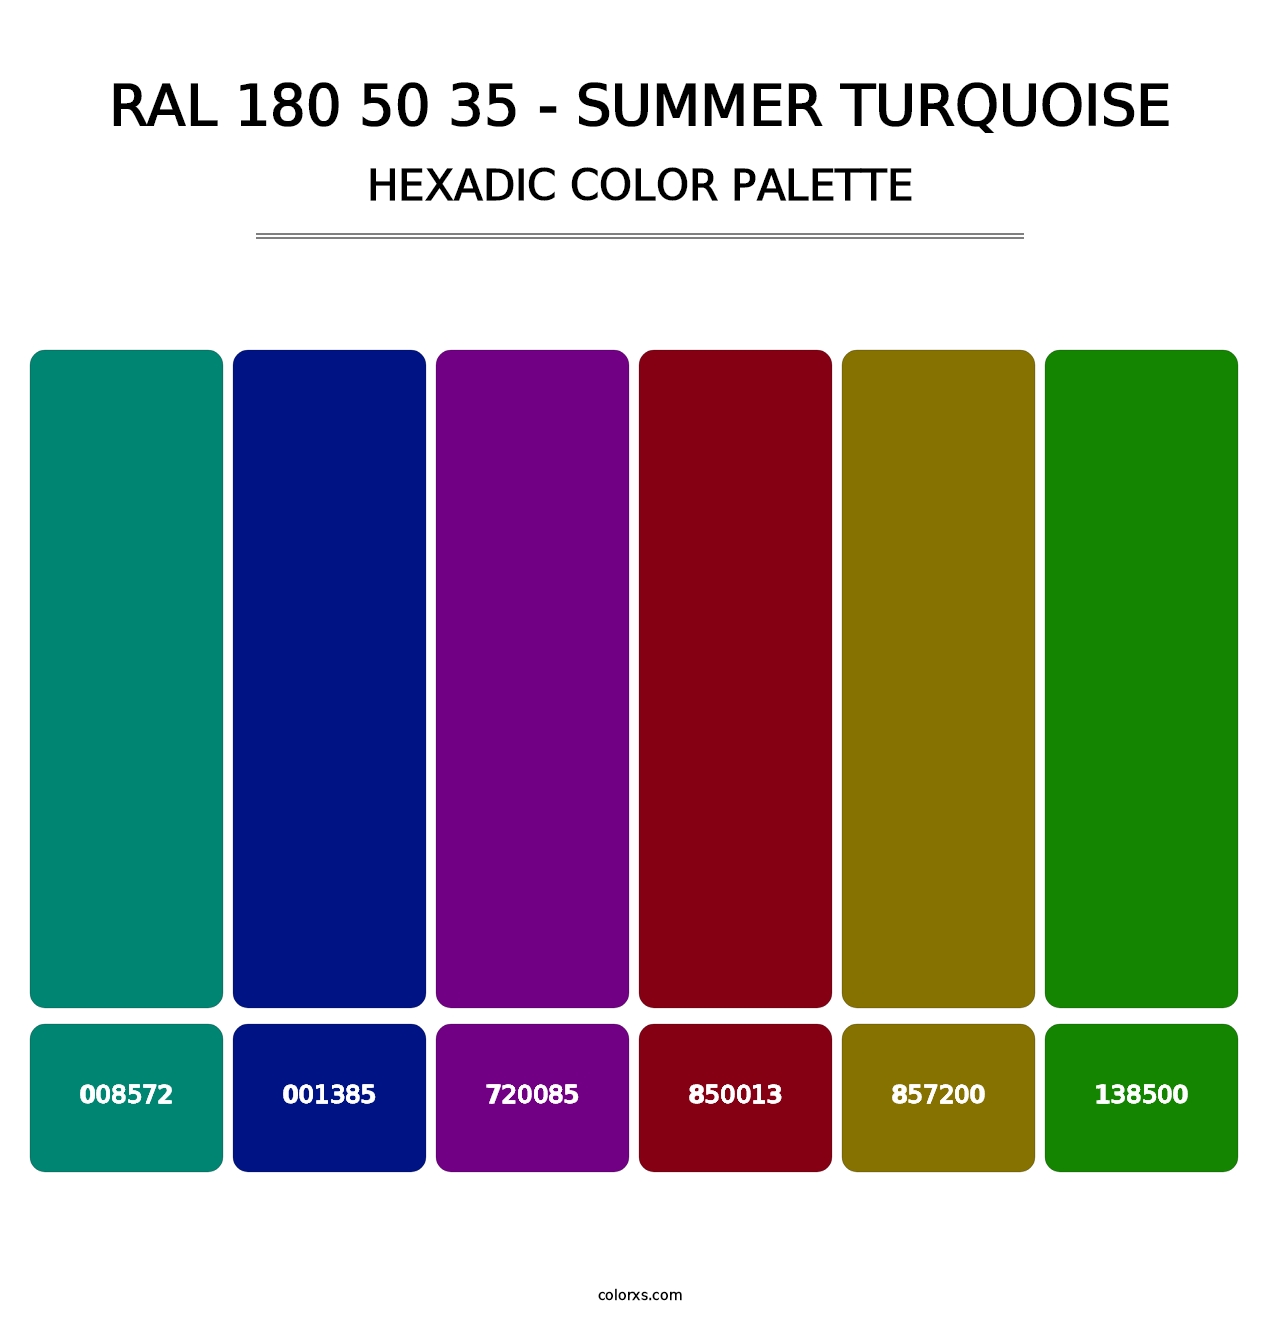 RAL 180 50 35 - Summer Turquoise - Hexadic Color Palette